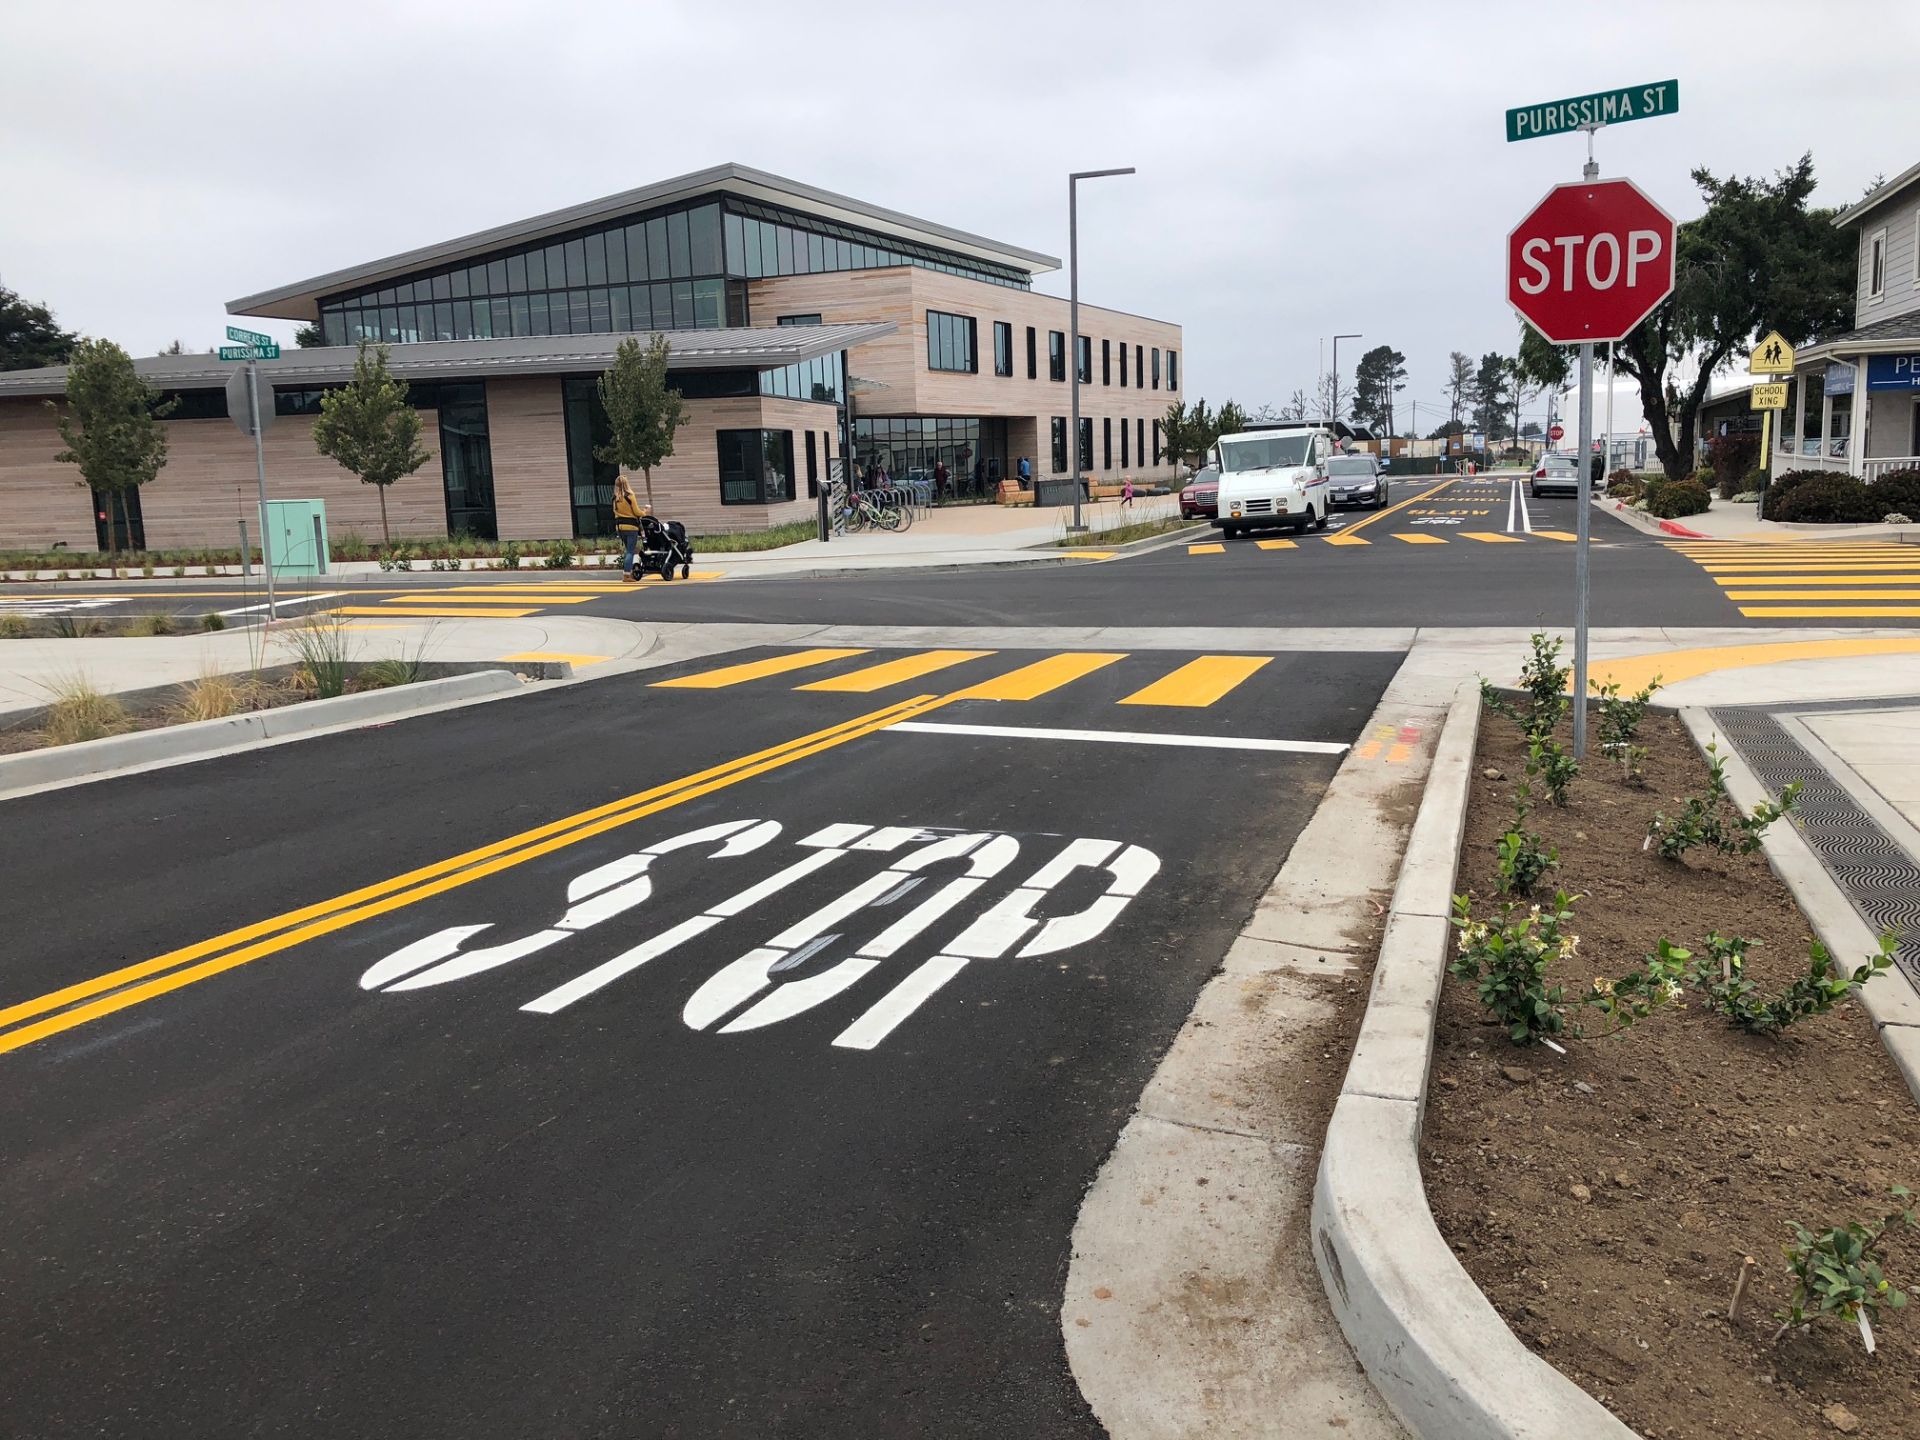 fresh painted street with a crosswalk and the word "Stop" painted on the street; to the left is a large building with windows, to the right there's dirt and shrubs in between a sidewalk and the street